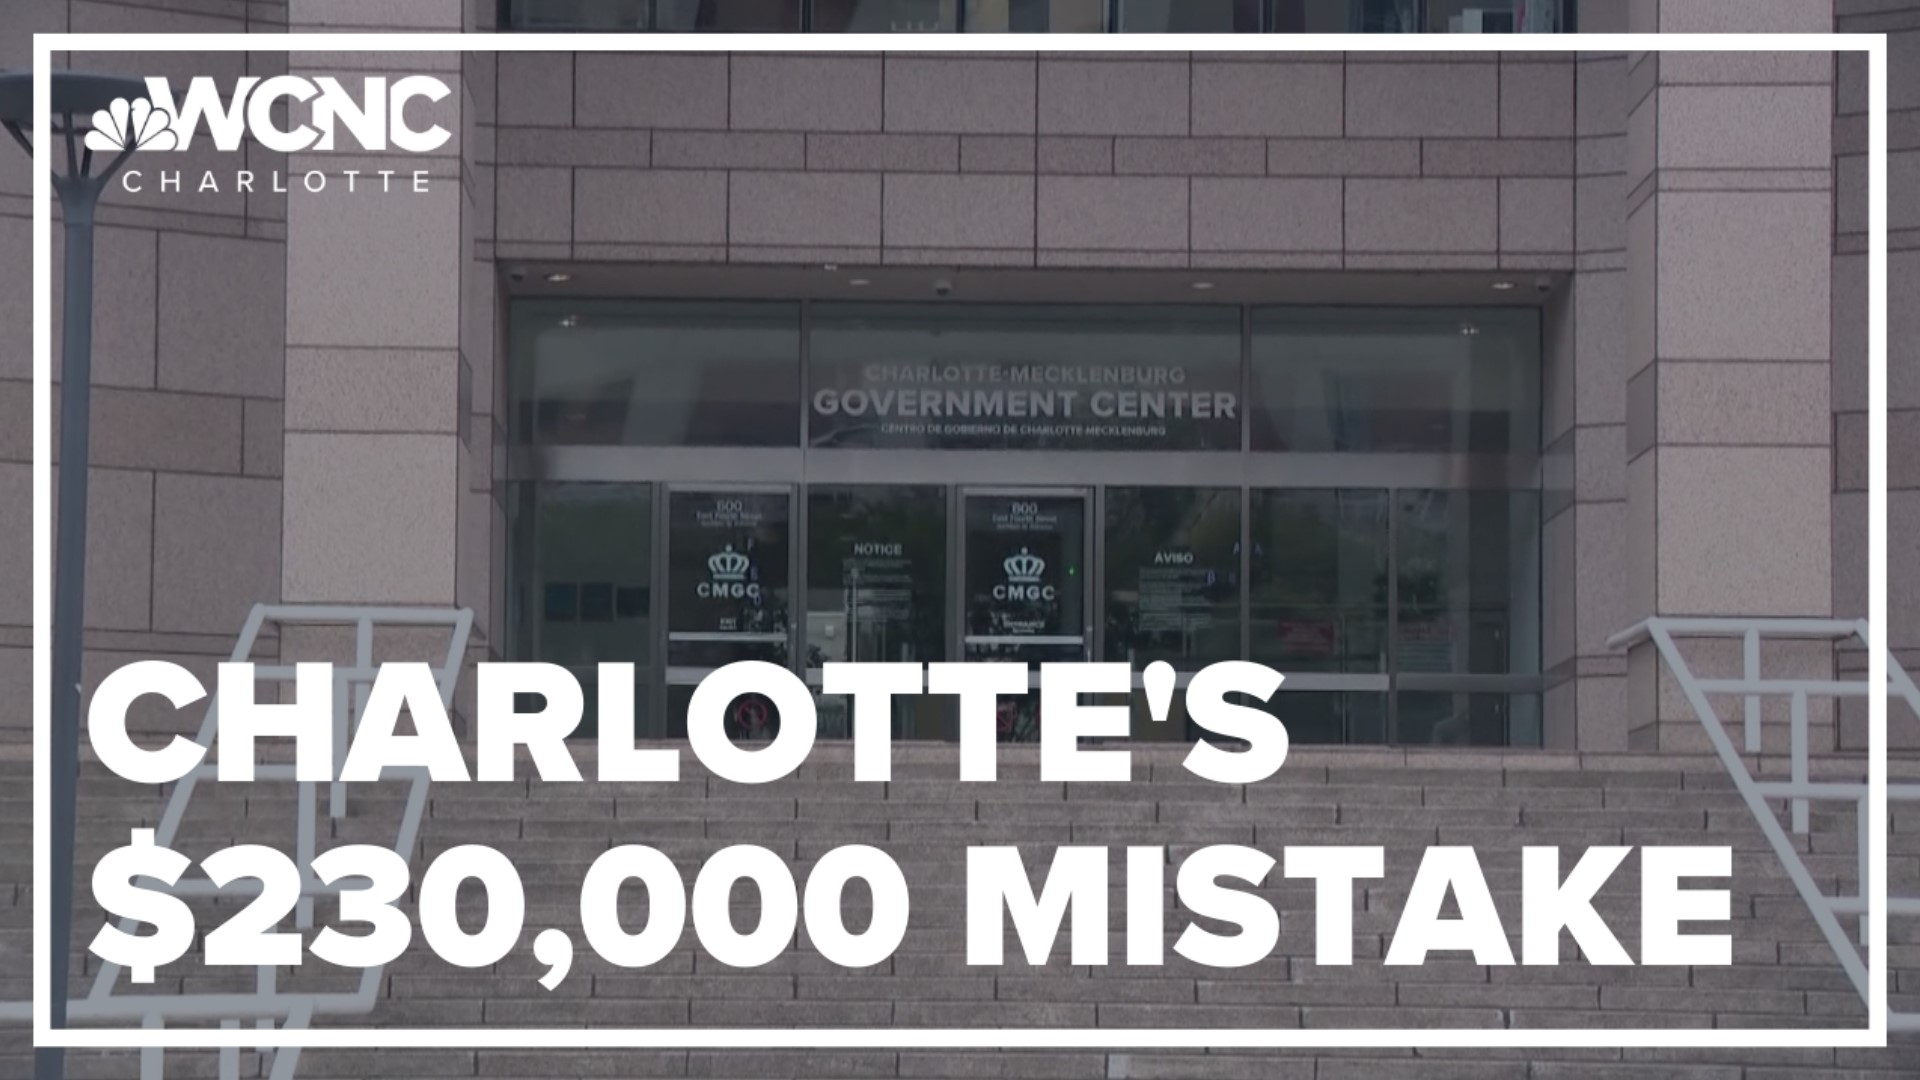 The city and nonprofit only learned of the oversight because of a WCNC Charlotte investigation.